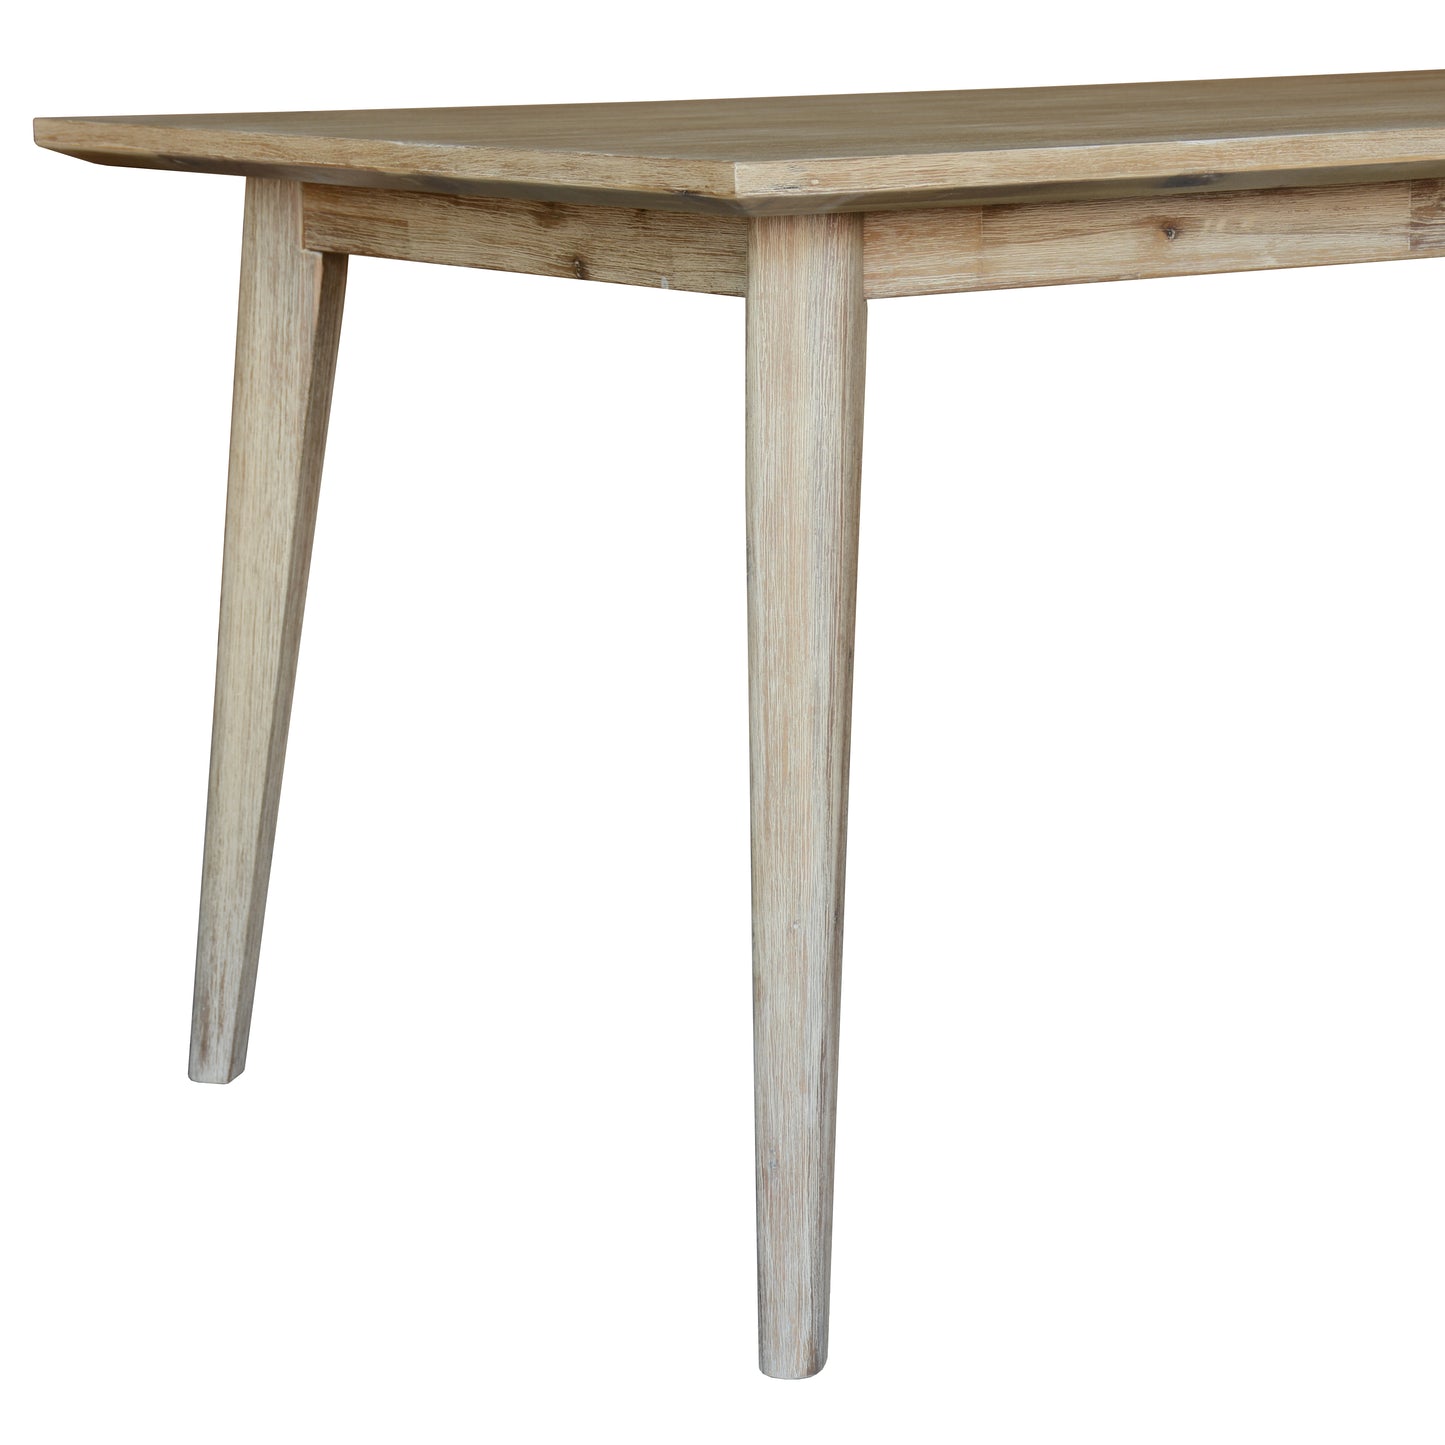 Grevillea Dining Solid Acacia Timber Wood Table 210cm